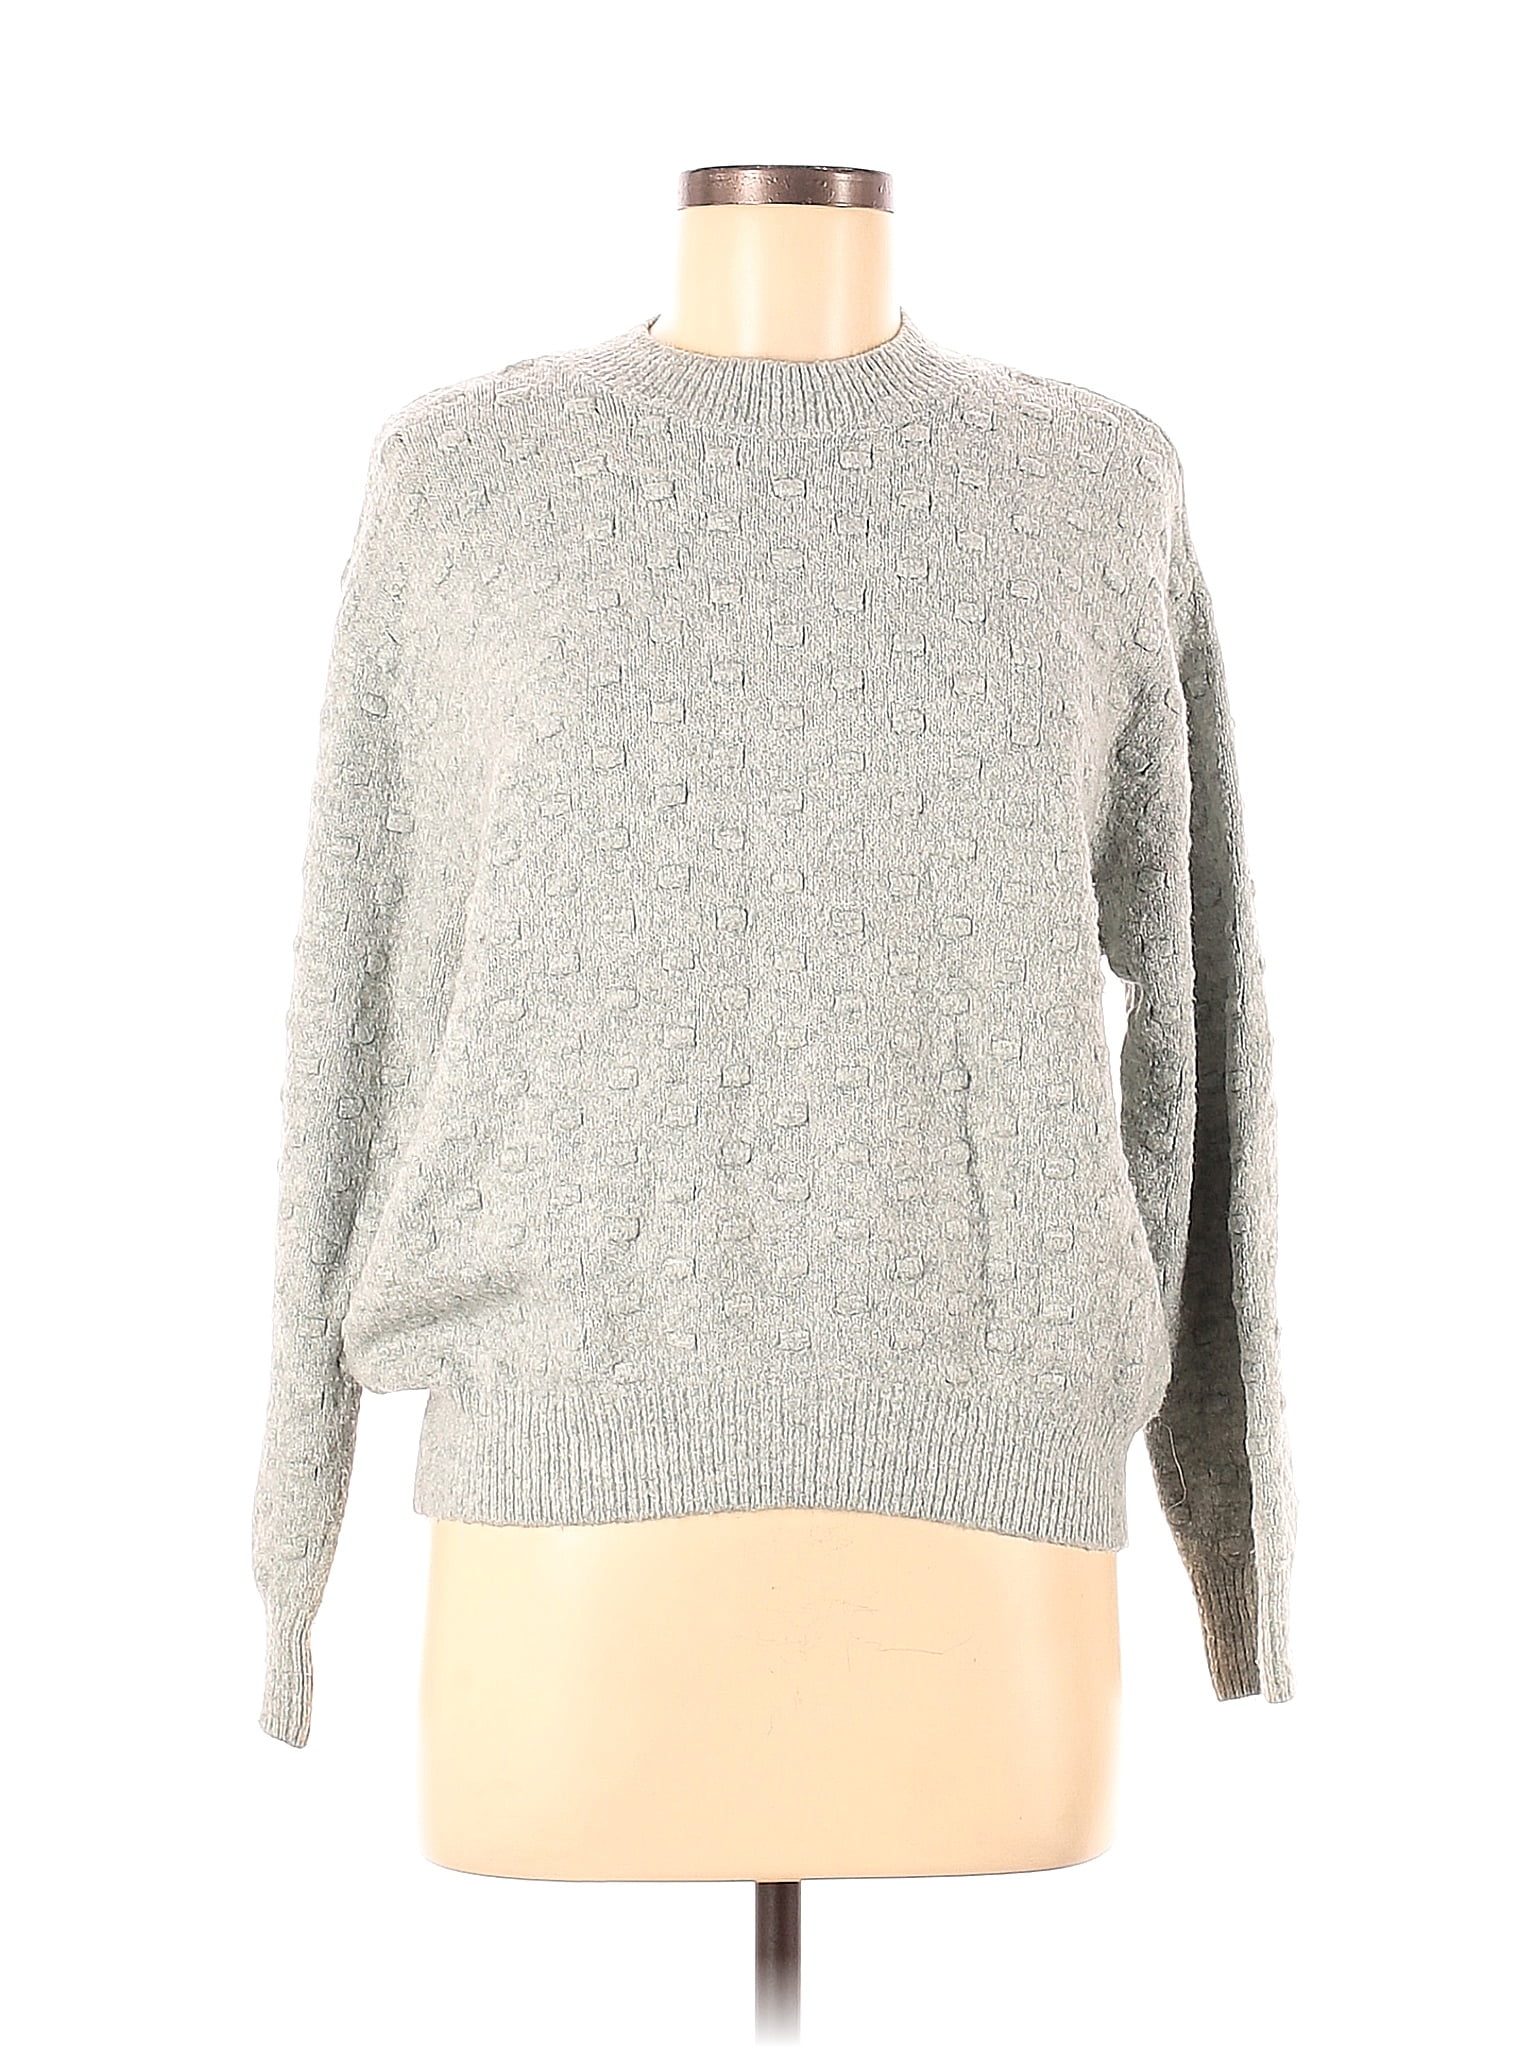 H&M Color Block Marled Gray Turtleneck Sweater Size XS - 46% off | thredUP